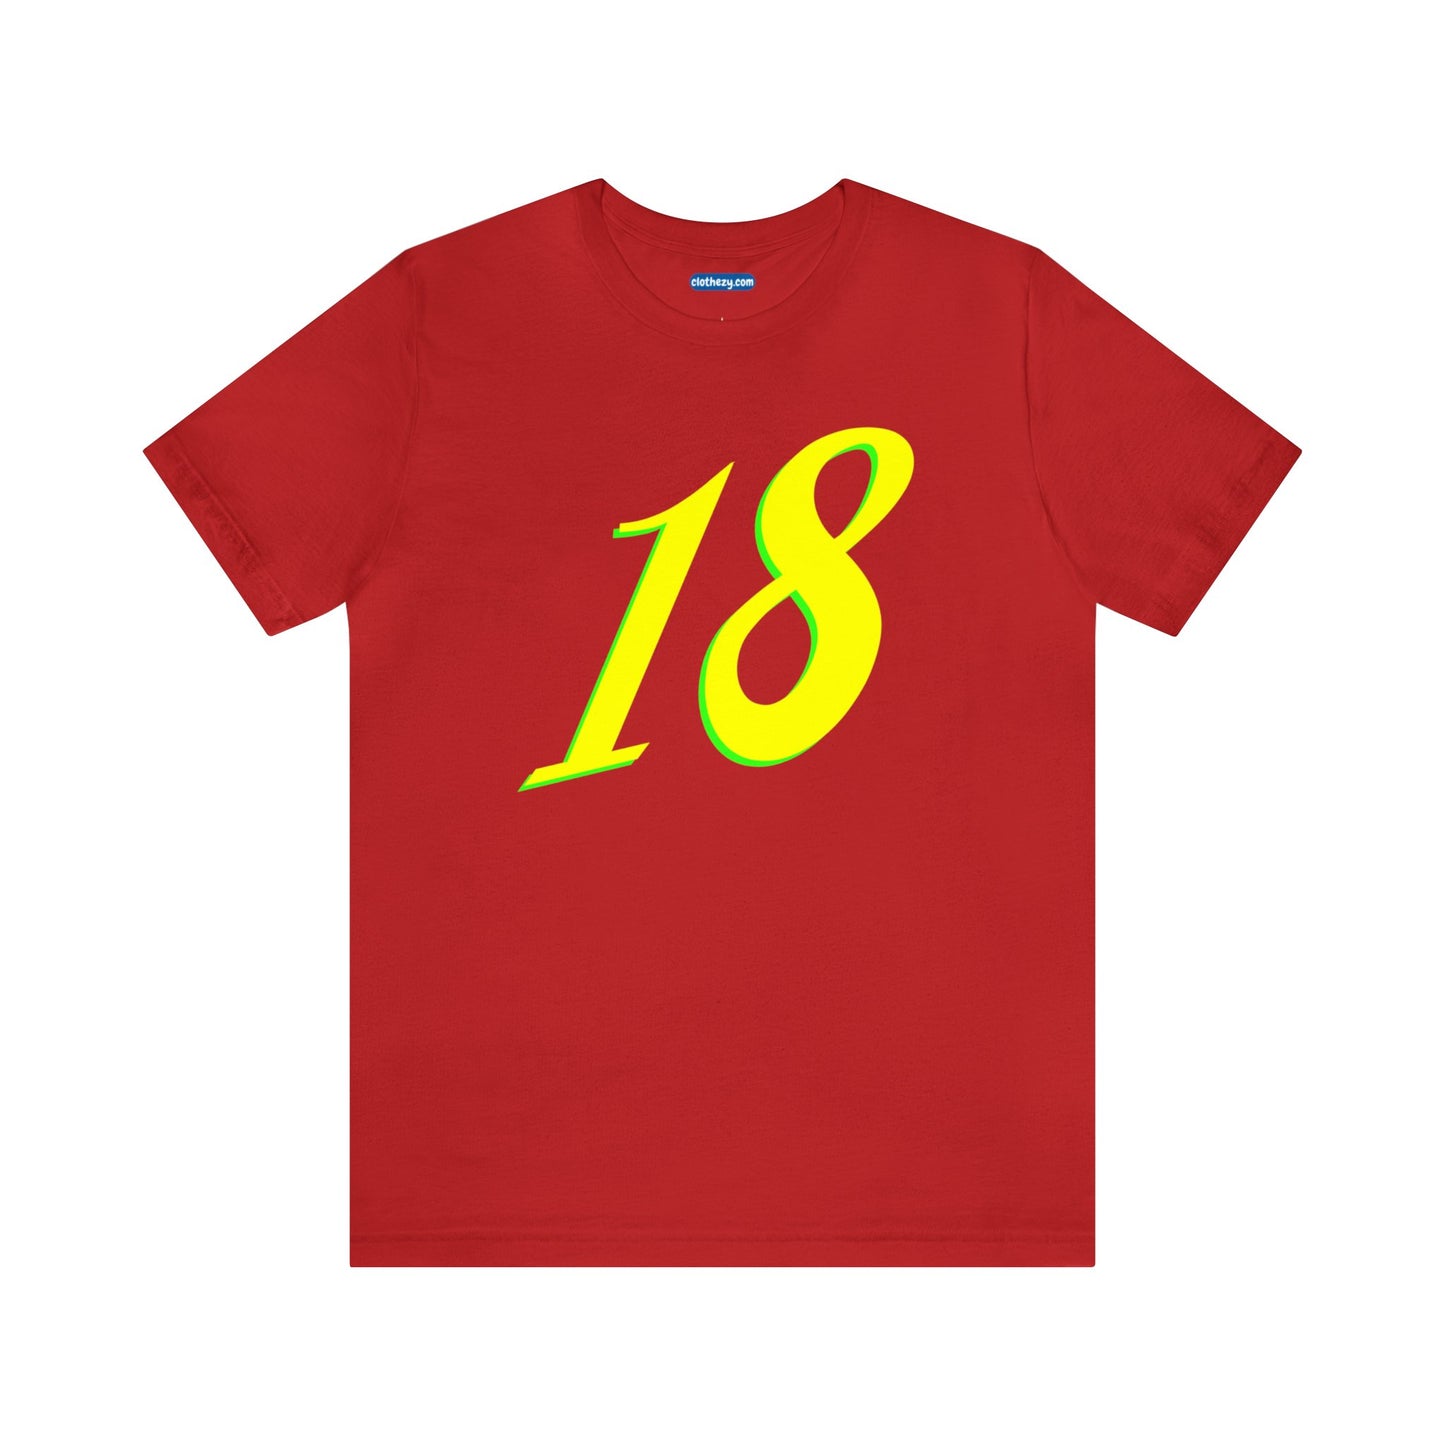 Number 18 Design - Soft Cotton Tee for birthdays and celebrations, Gift for friends and family, Multiple Options by clothezy.com in Red Size Small - Buy Now